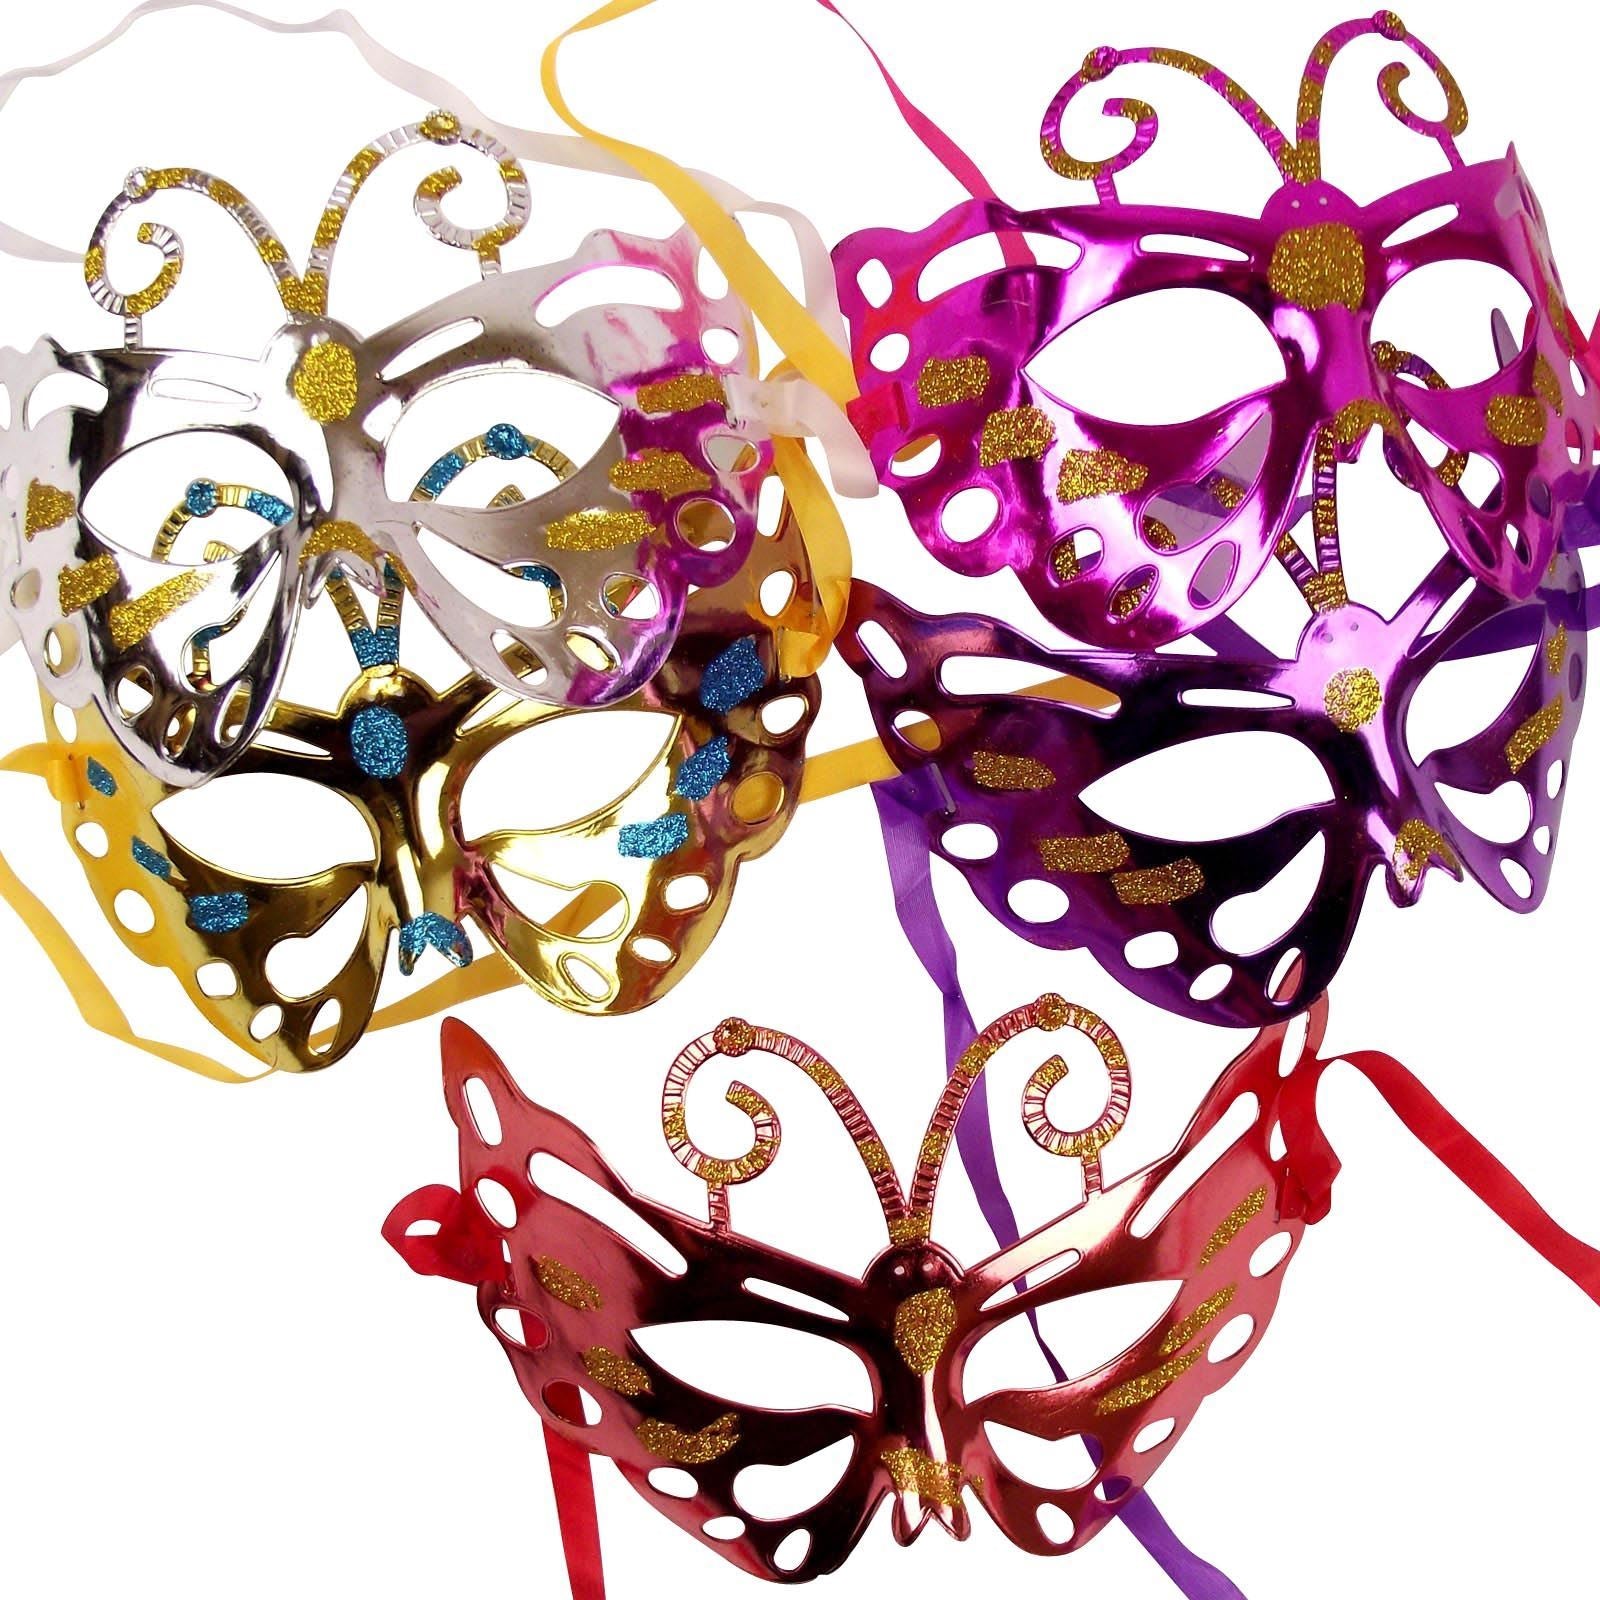 Metallic Butterfly Masquerade Masks with Glitter